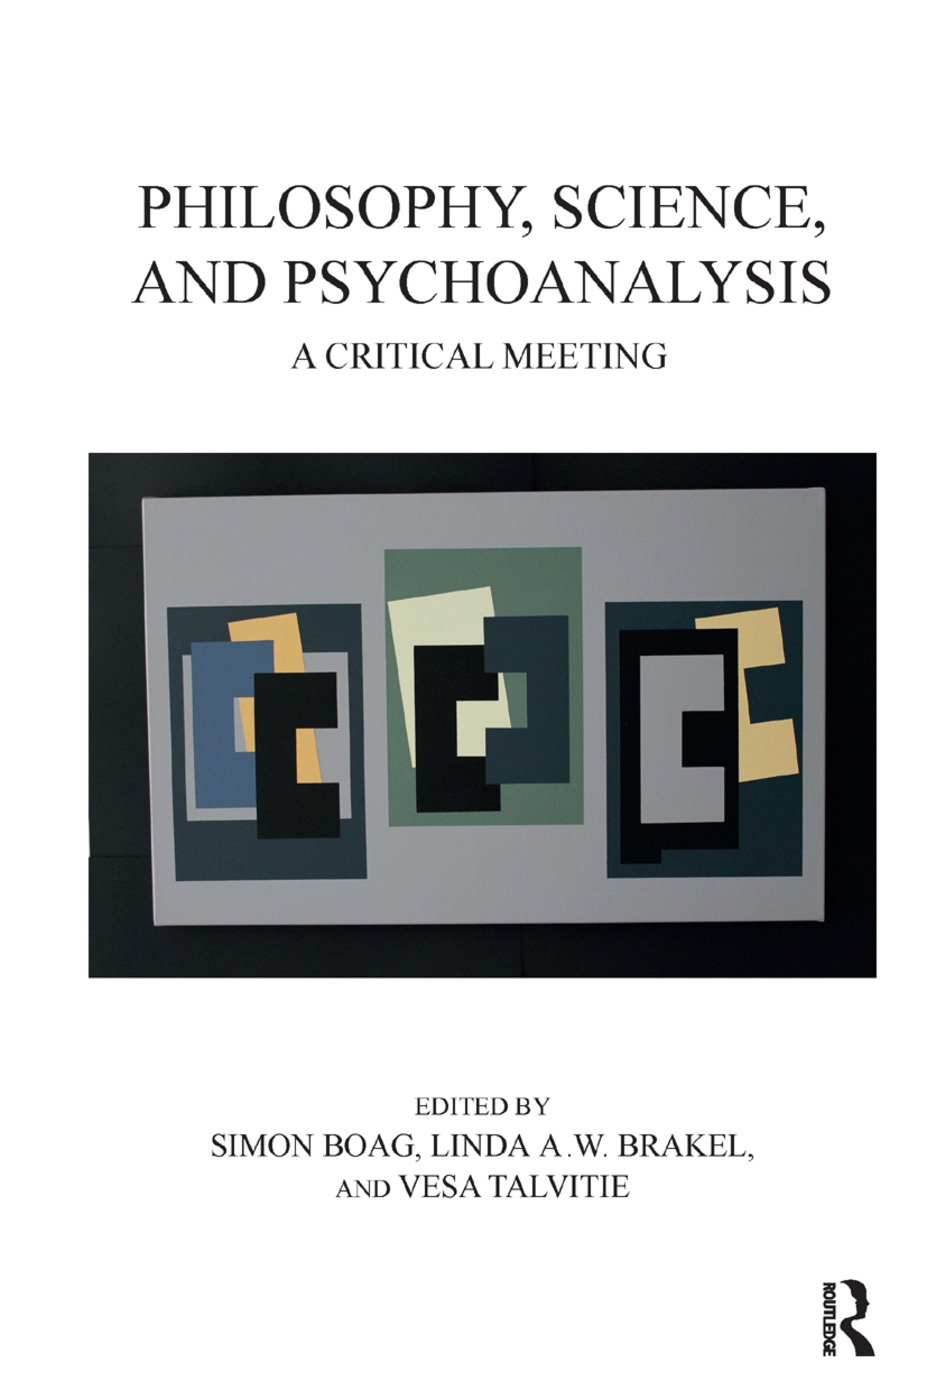 Philosophy, Science, and Psychoanalysis: A Critical Meeting